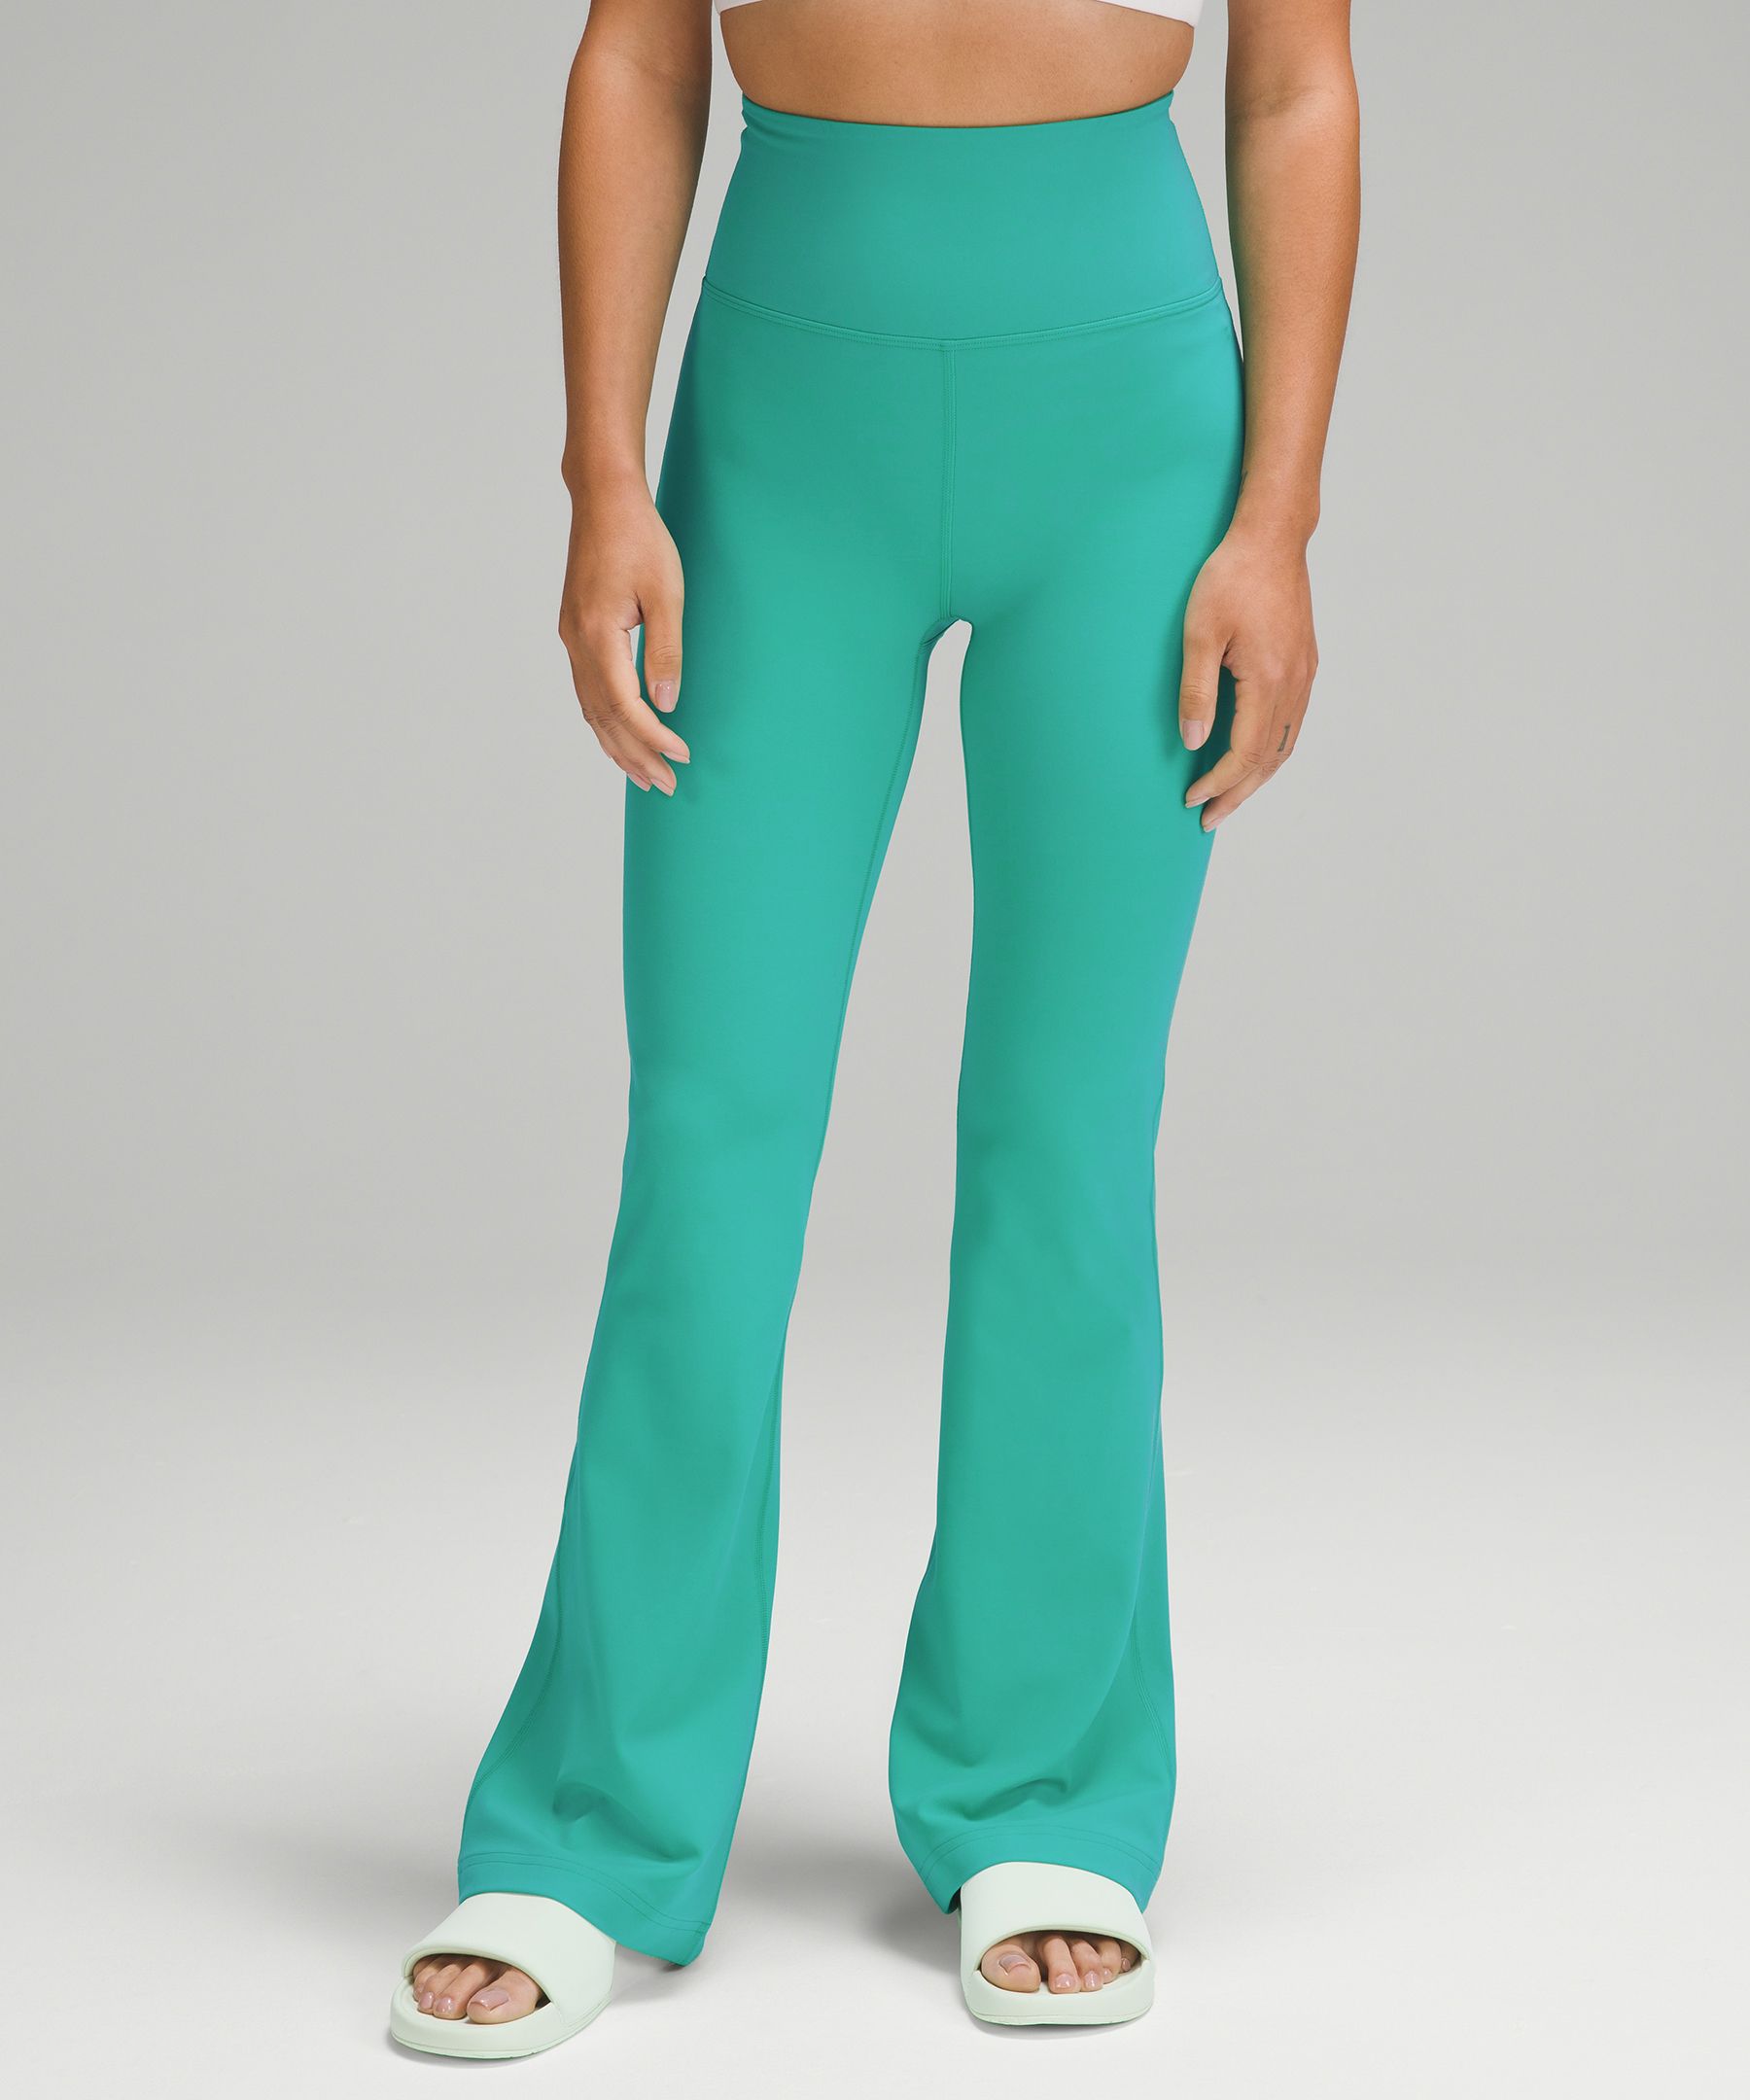 groove super high rise flare pants emilie｜TikTok Search